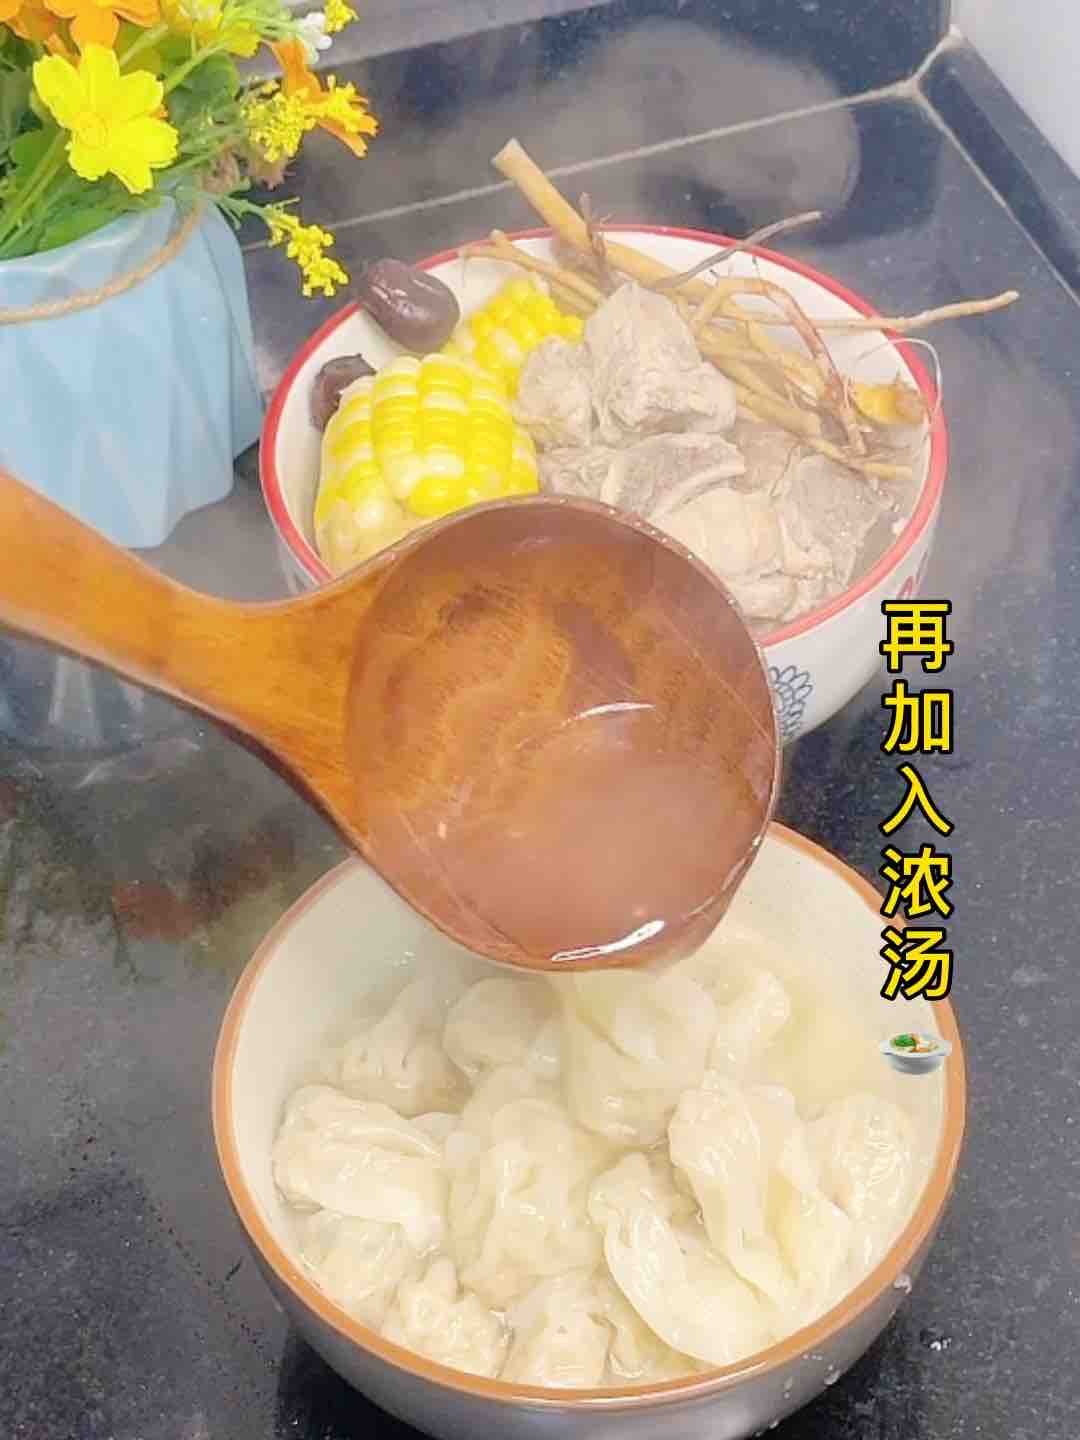 Fragrant Shili Laoguang Liang Soup, Pork Bones are Cooked Like This, Super Fragrant and Super Good recipe